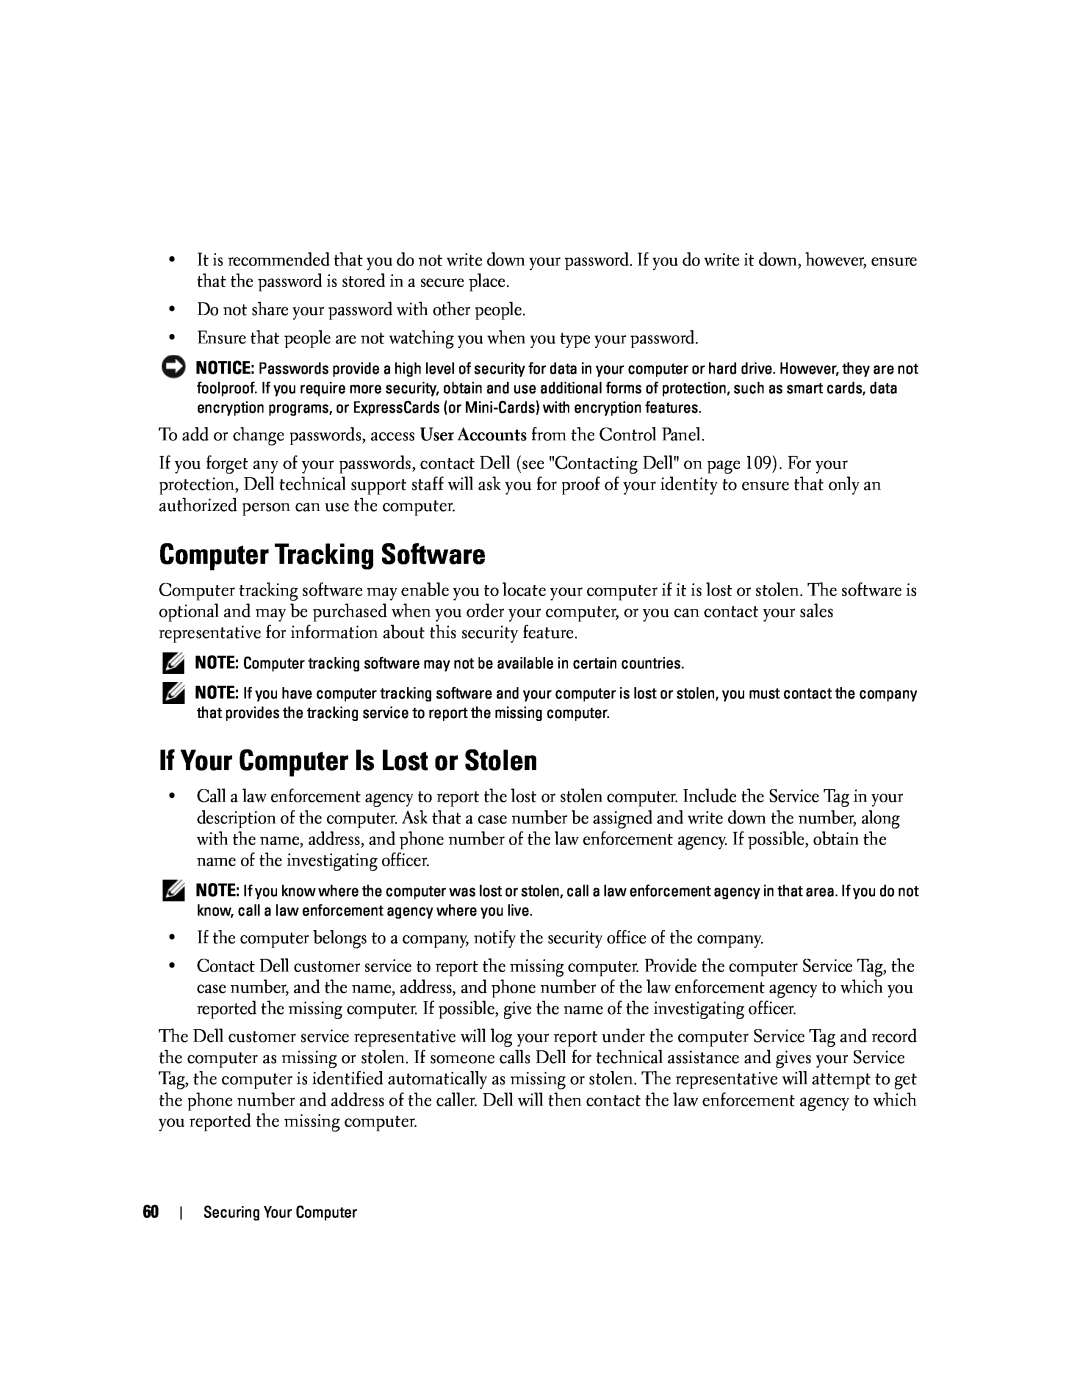 Dell 1501 owner manual Computer Tracking Software, If Your Computer Is Lost or Stolen 